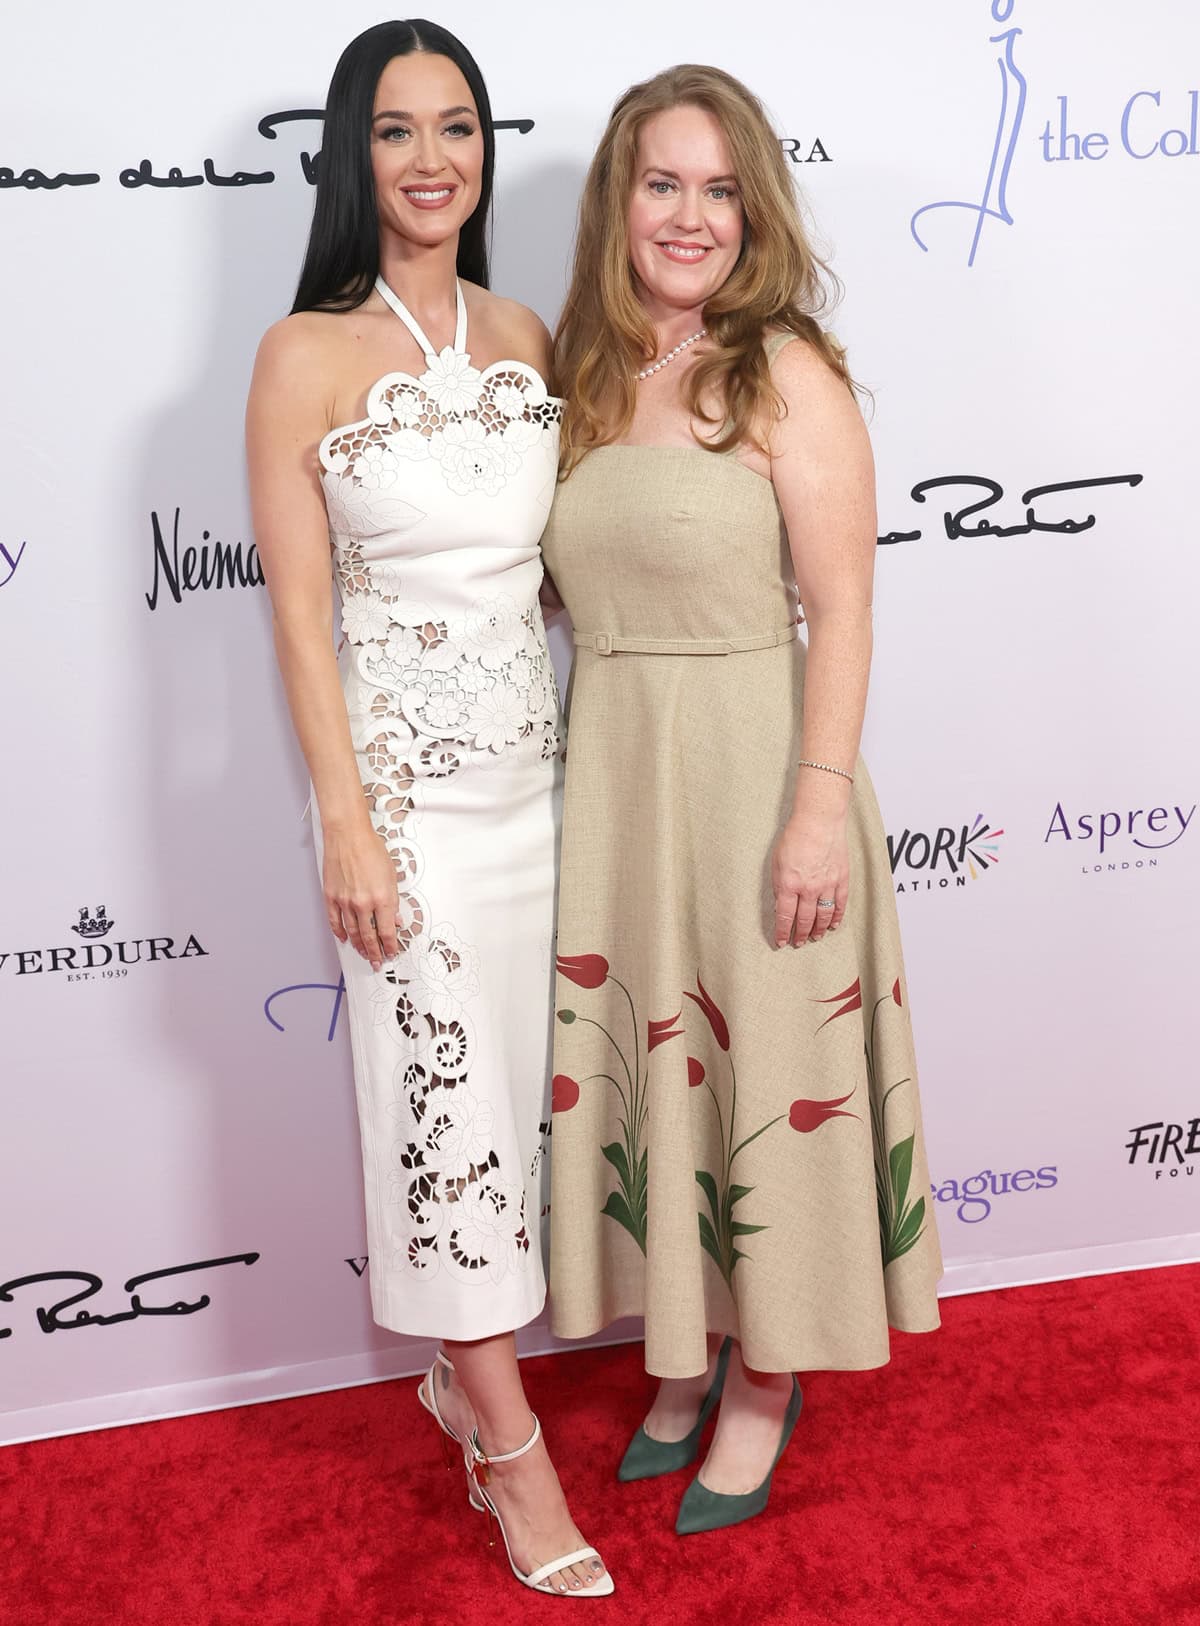 Sisterly Support: Katy Perry and Angela Lerche celebrate a night of fashion and philanthropy